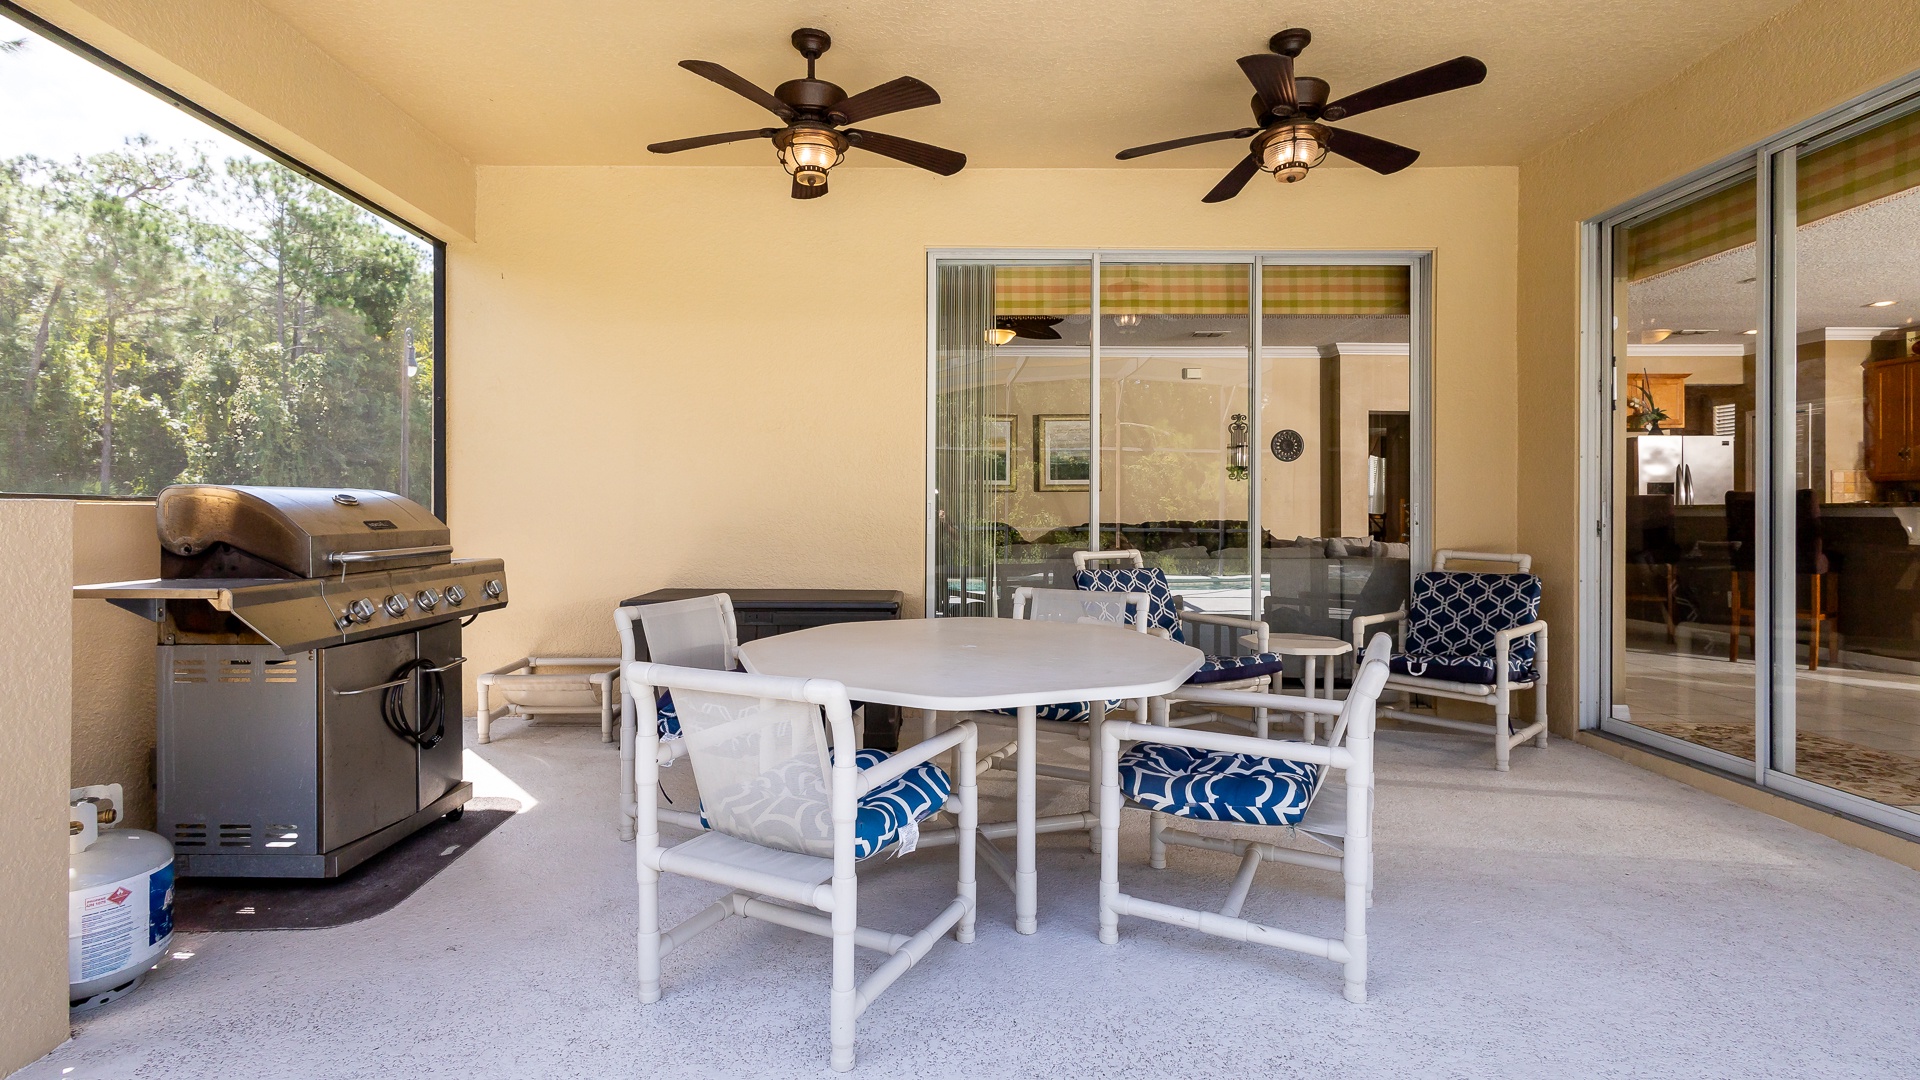 Dine al fresco on the back patio or relax while you grill up a feast!